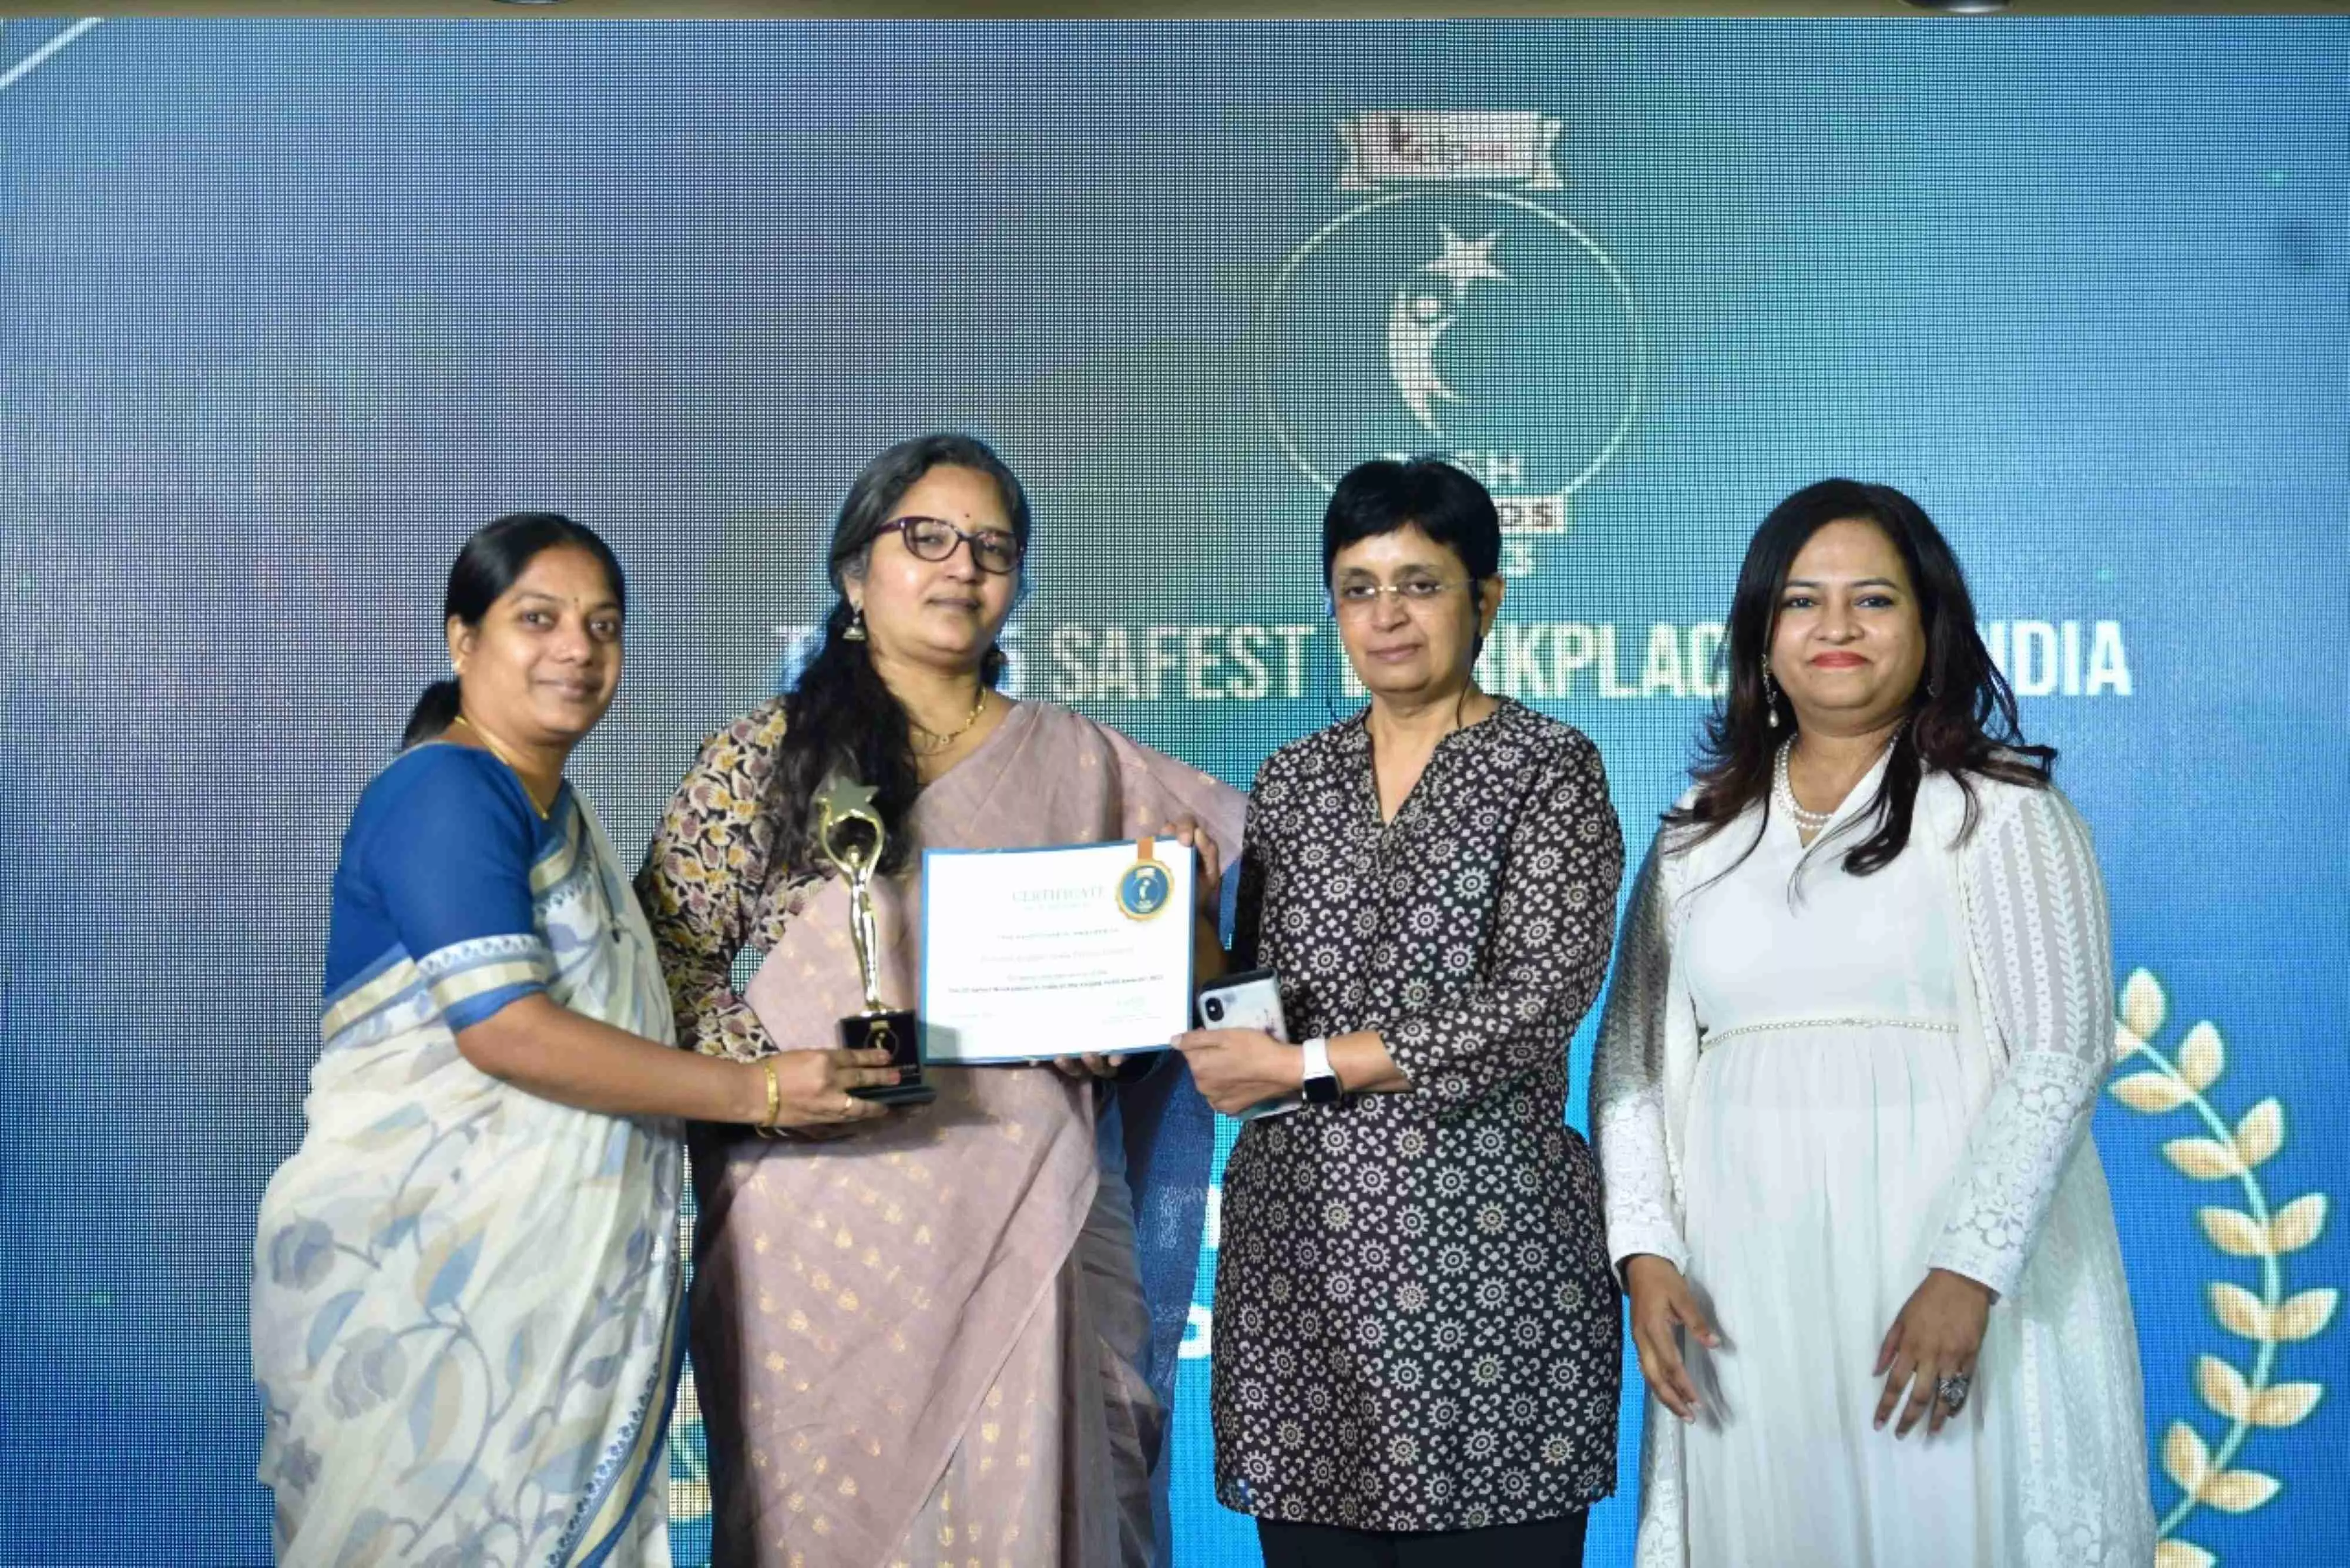 Brandix Apparel India among the ‘Top 25 Safest Workplaces’ in India